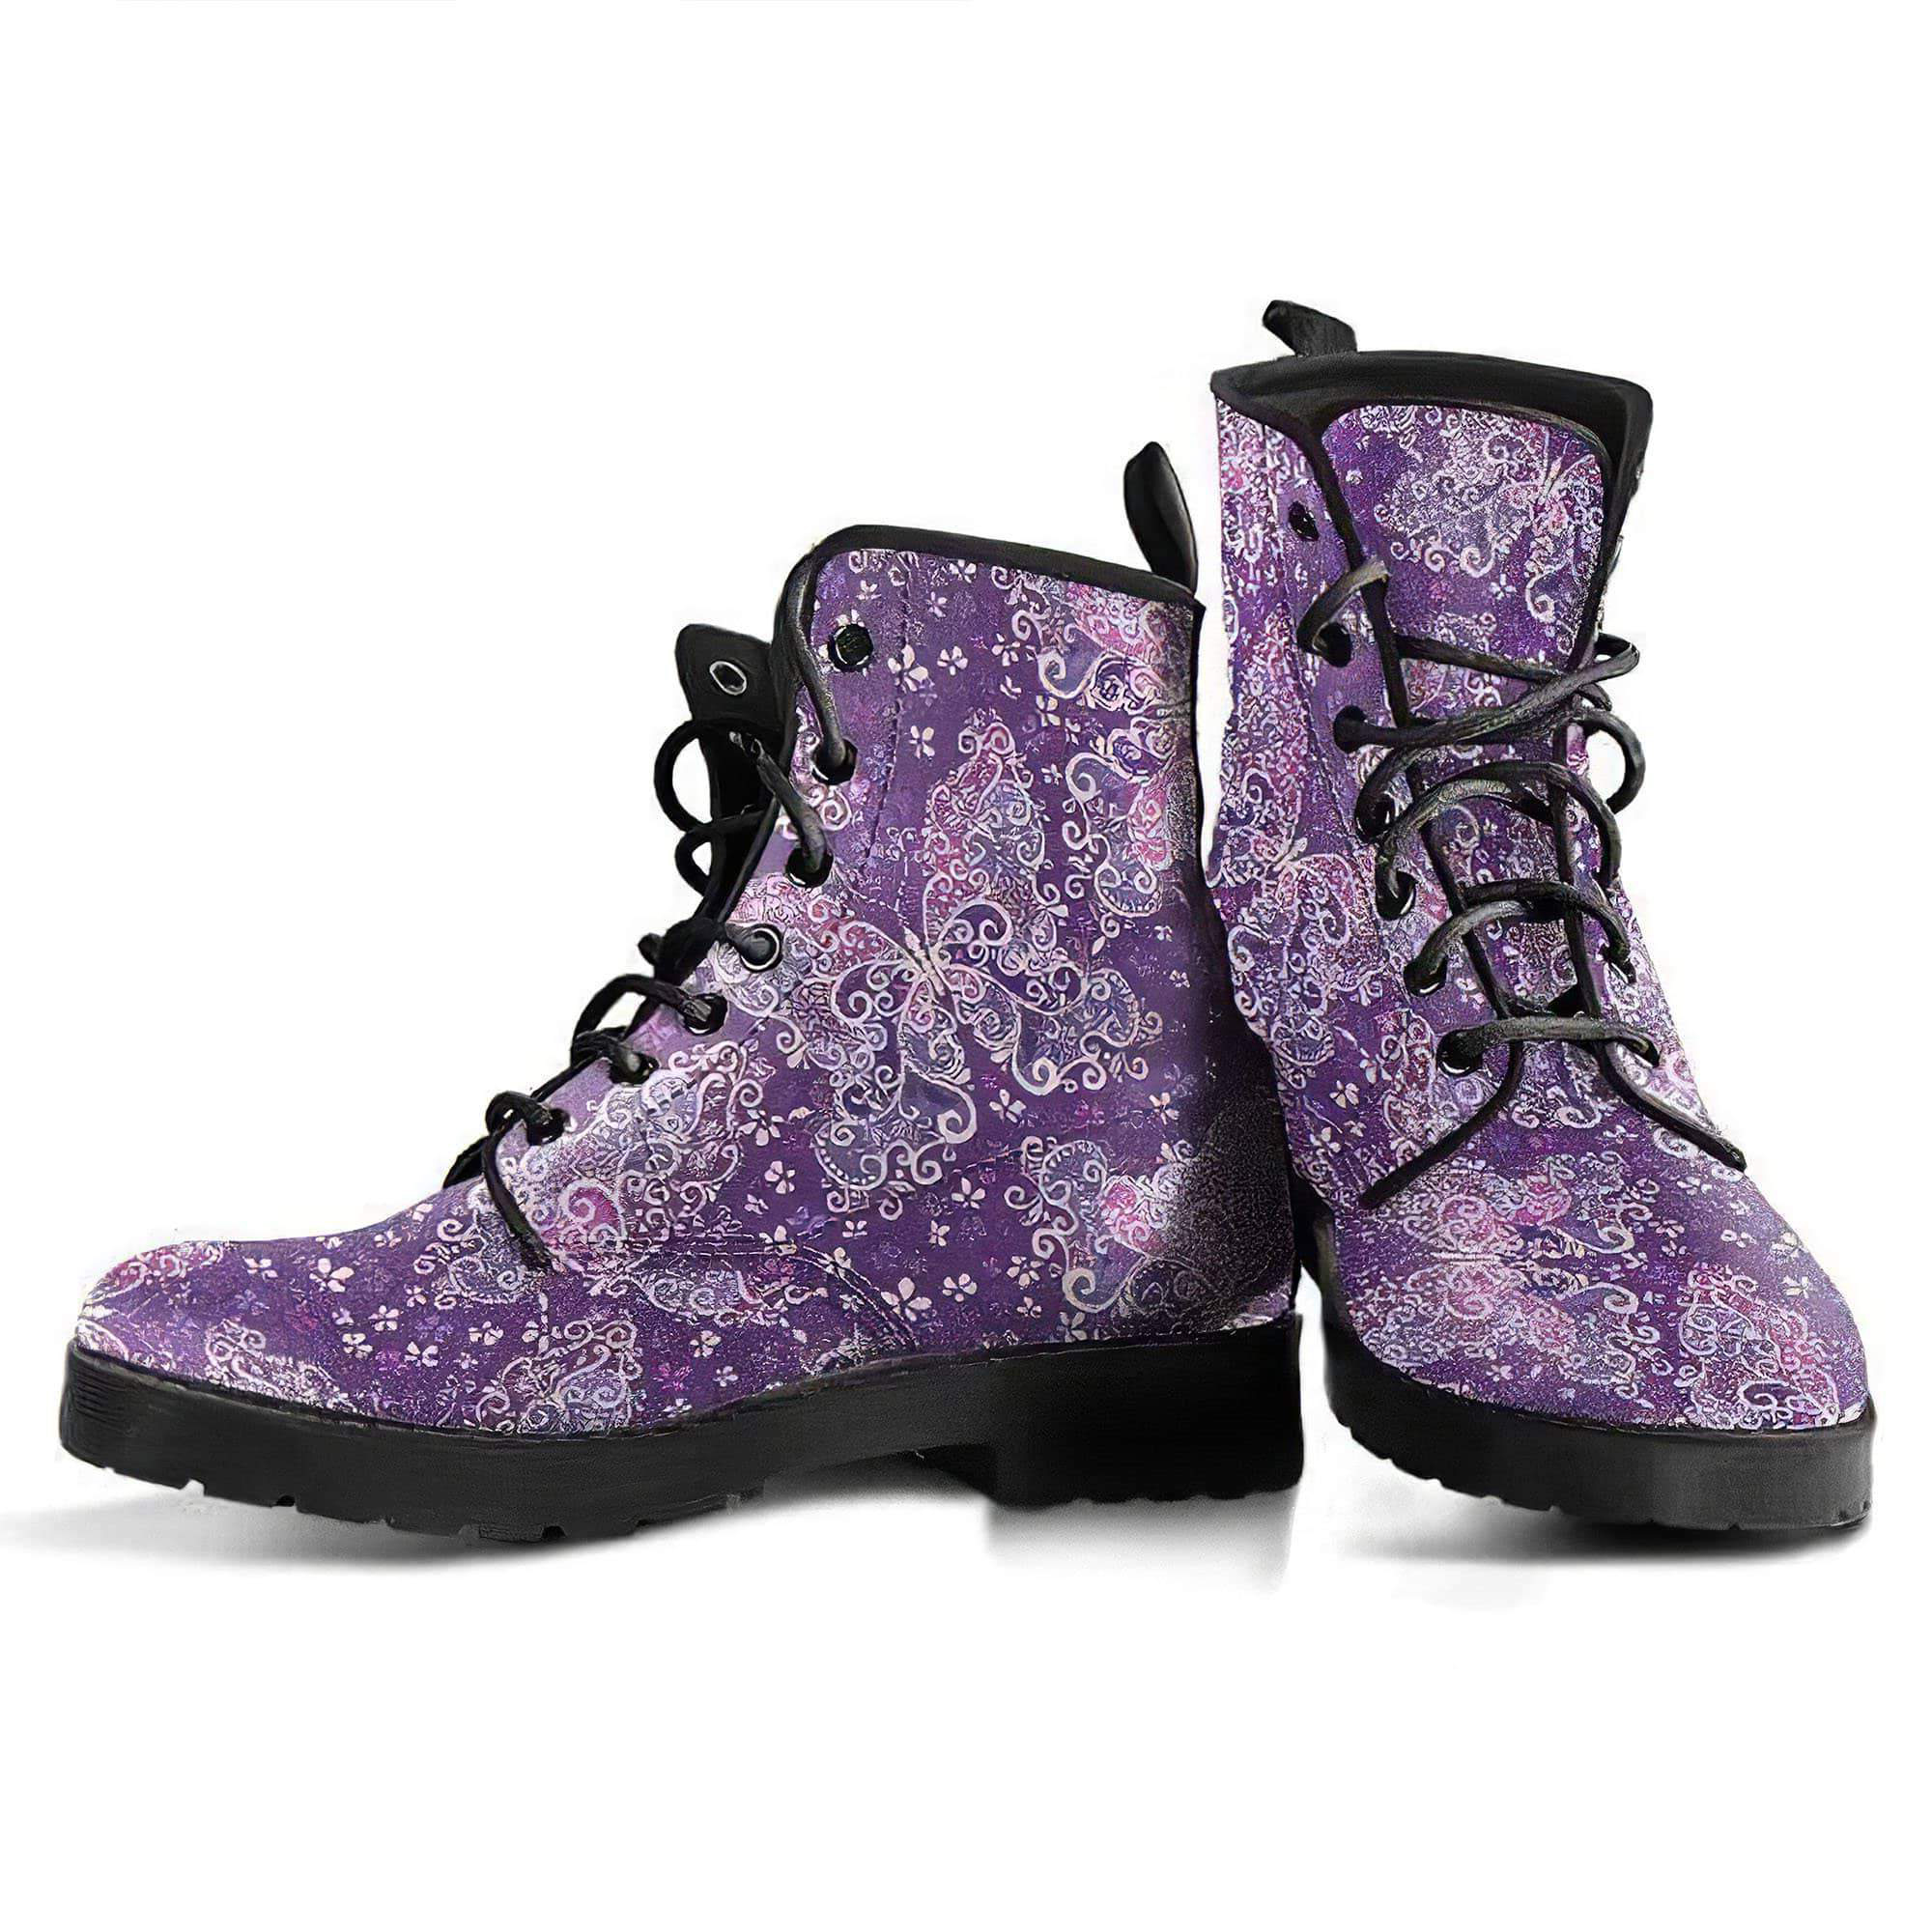 purple-butterfly-handcrafted-boots-women-s-leather-boots-12051933134909.jpg